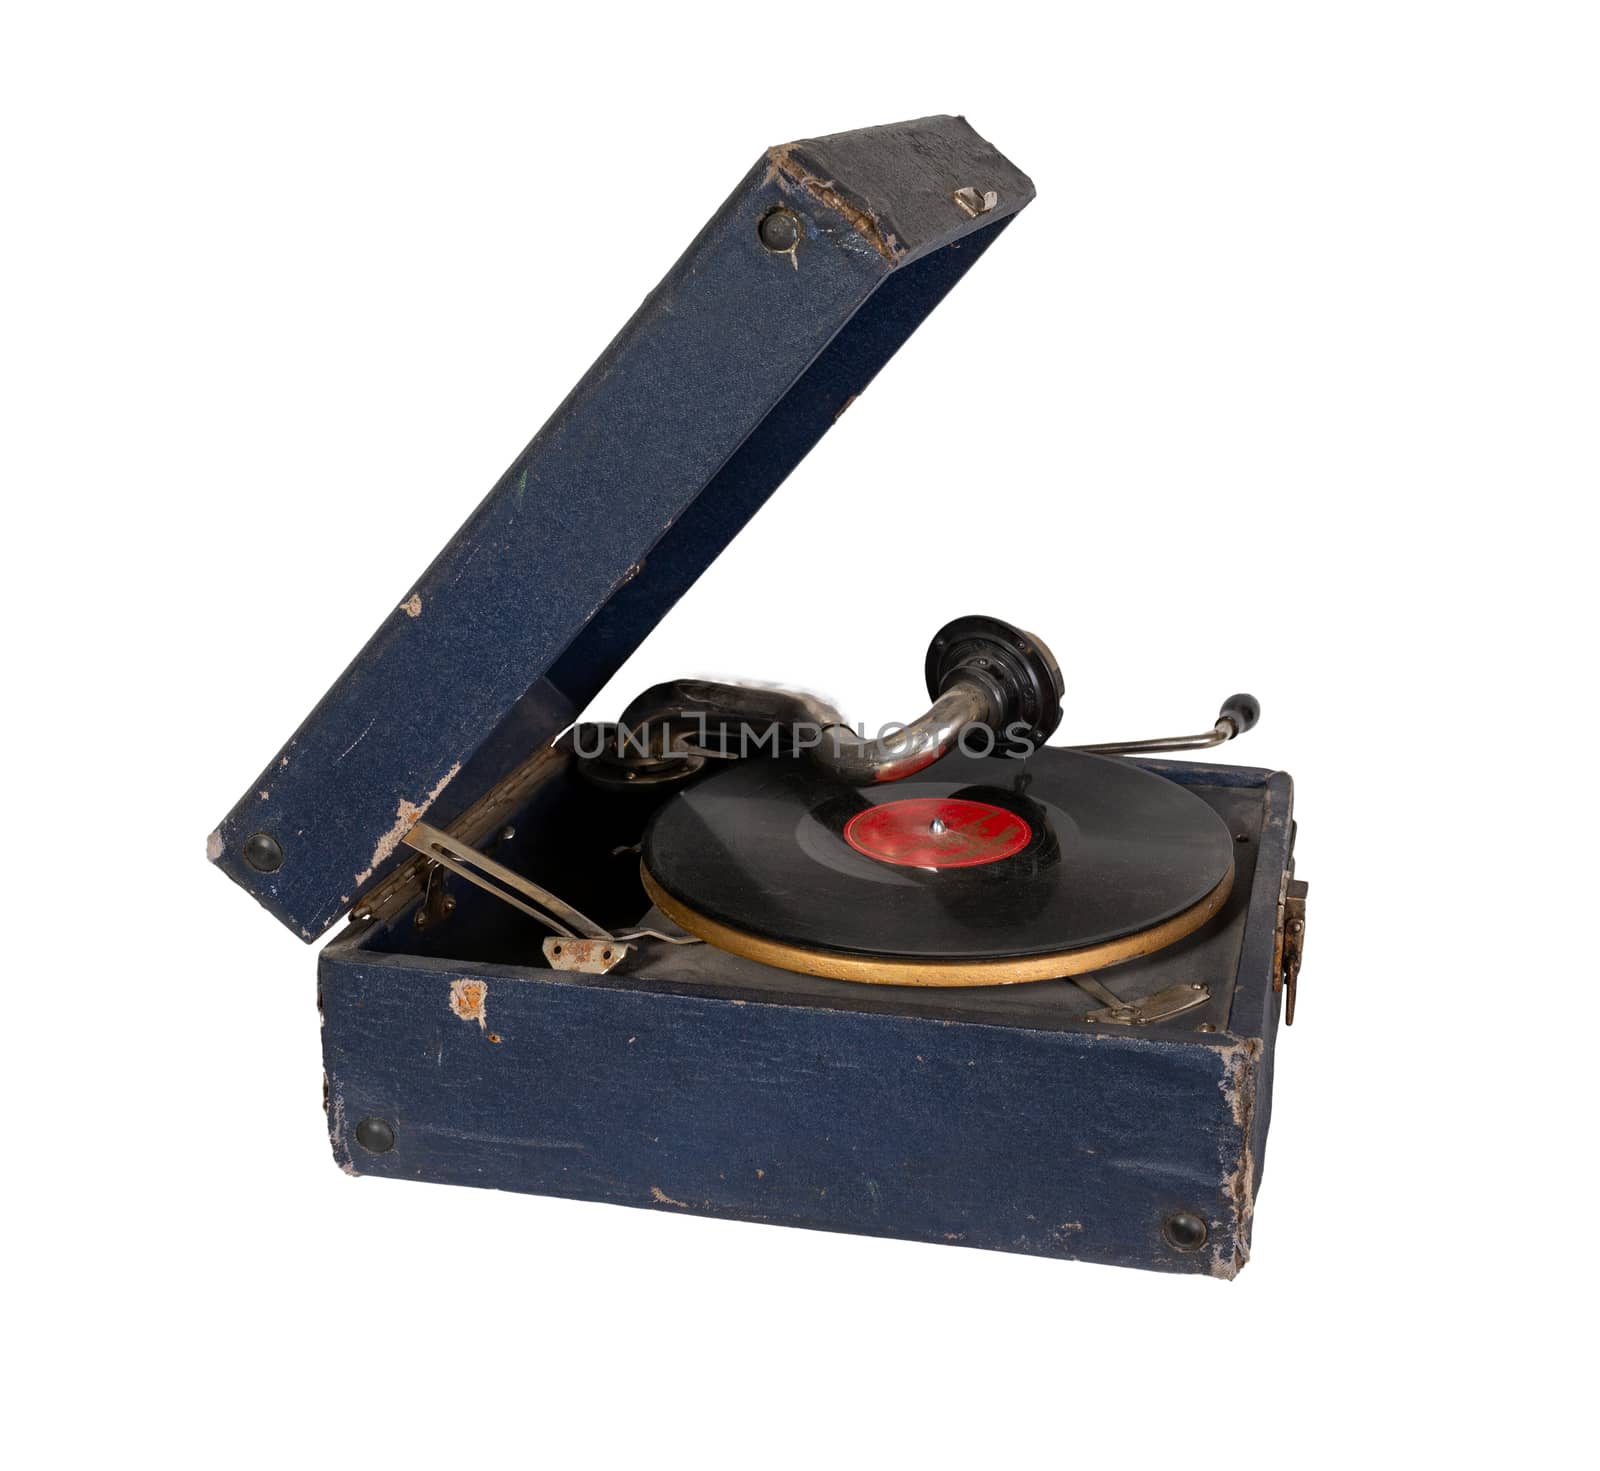 Phonograph with crank. Old gramophone Isolated on a white background. by 977_ReX_977